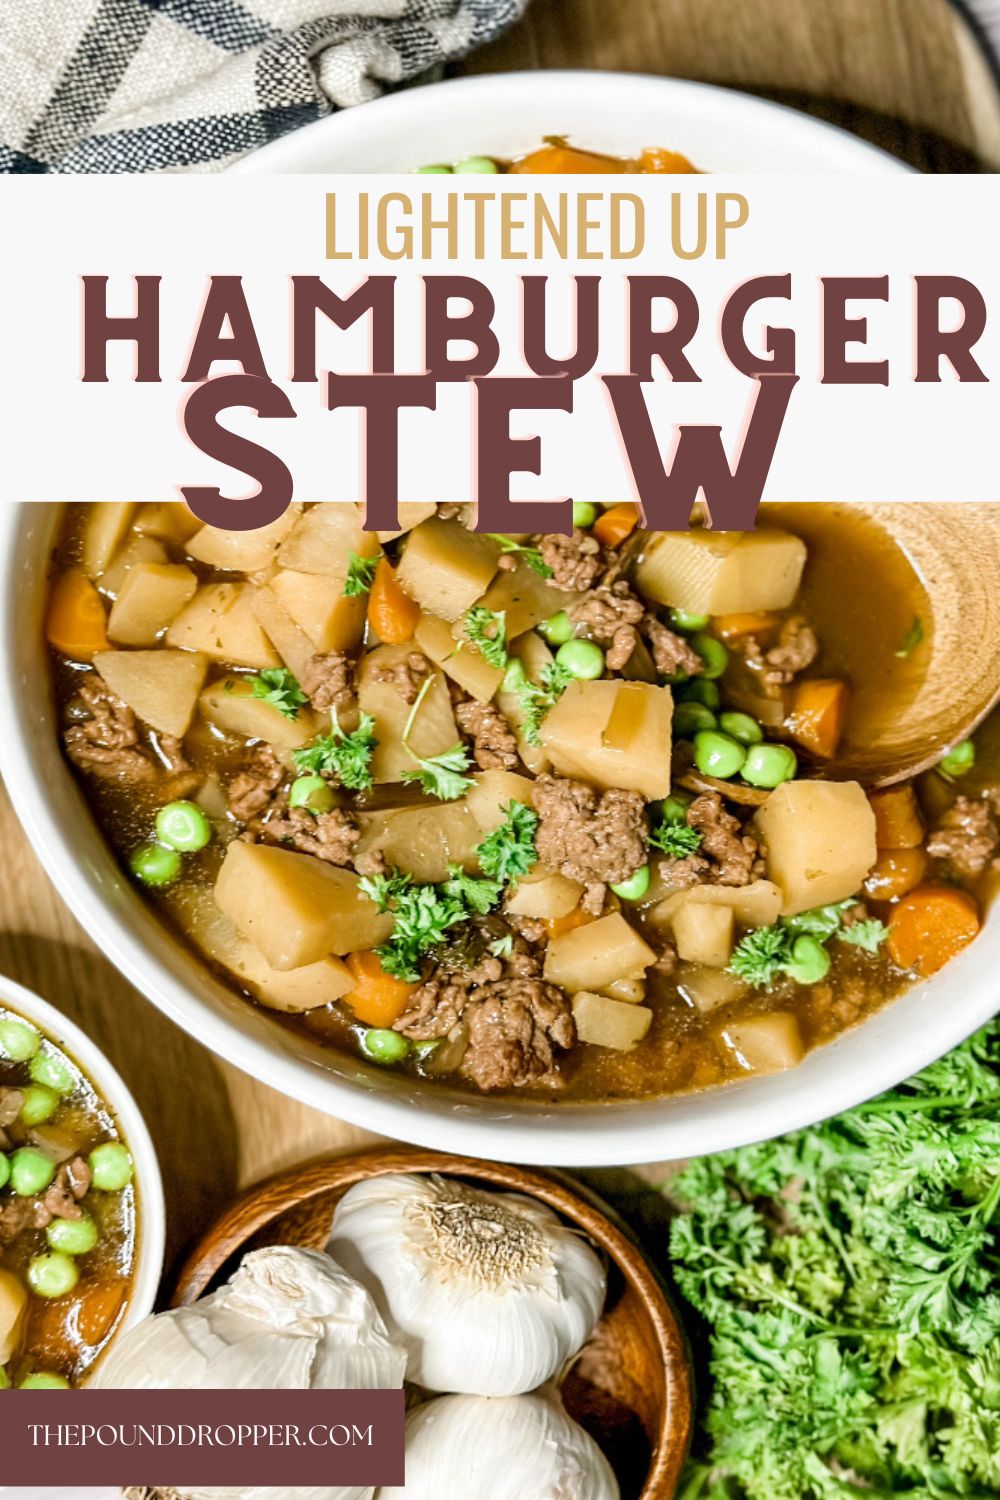 This Lightened Up Hamburger Stew is very to traditional beef stew, but it’s made with lean ground beef instead of stew meat. It's packed with lots of tender vegetables including: carrots, potatoes, yellow onion, garlic, green peas, and fresh herbs and seasonings. It's easy win for a chilly cold day! via @pounddropper